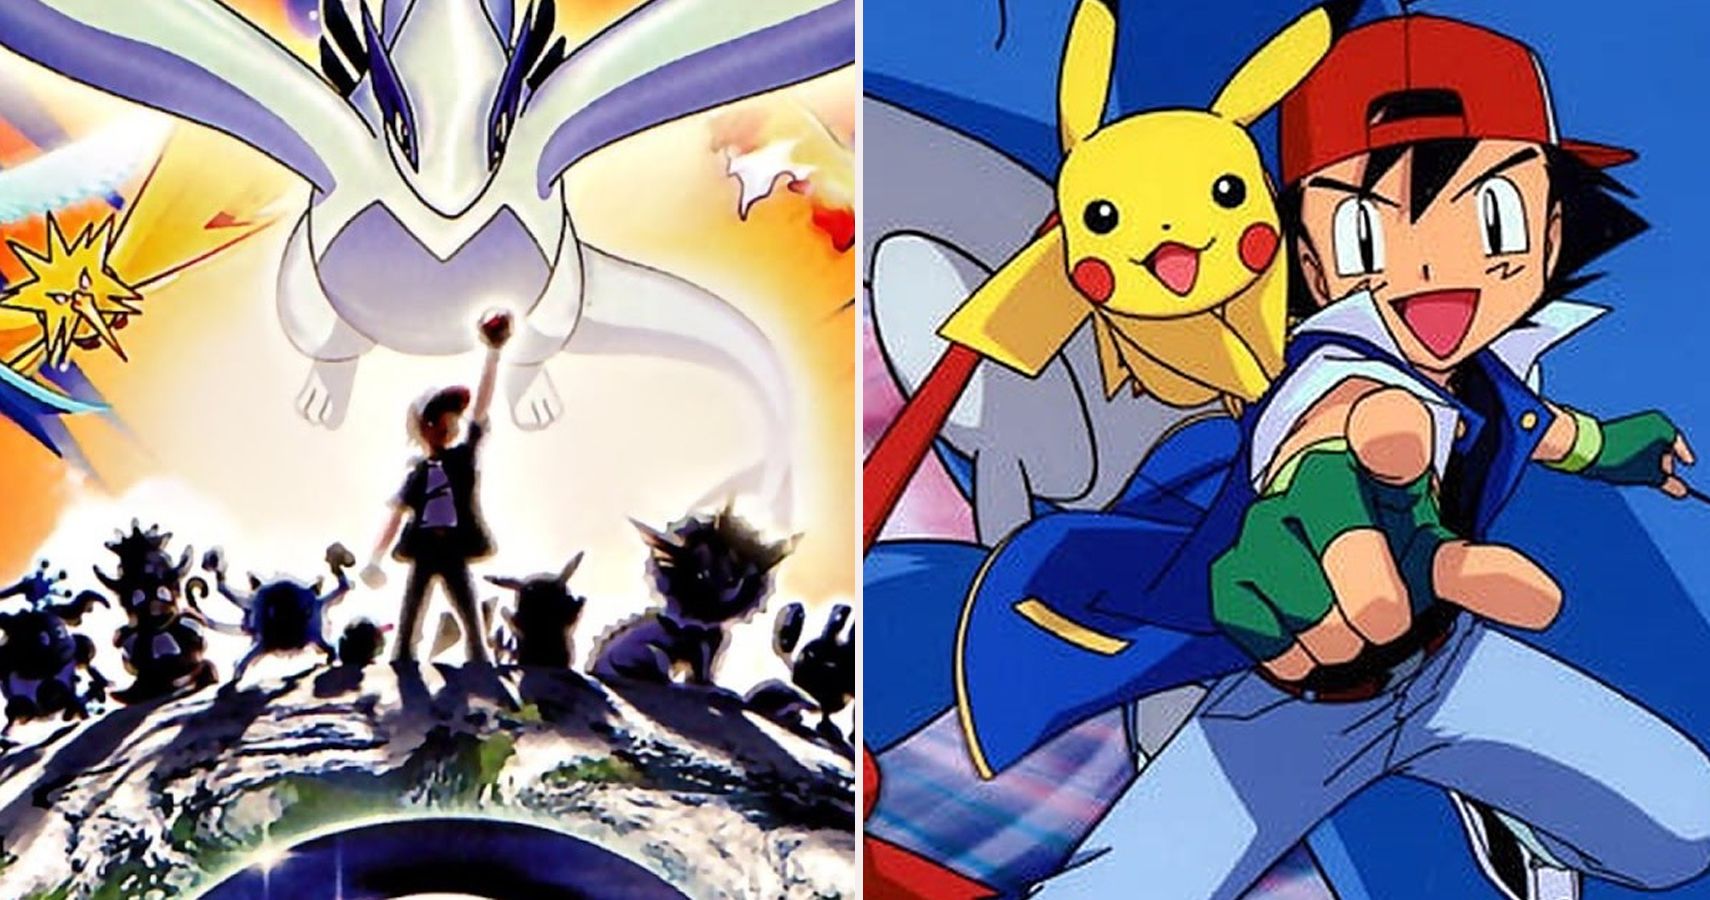 Pokémon Yellow's Pikachu Compared To The Anime's: Which Is Stronger - IMDb